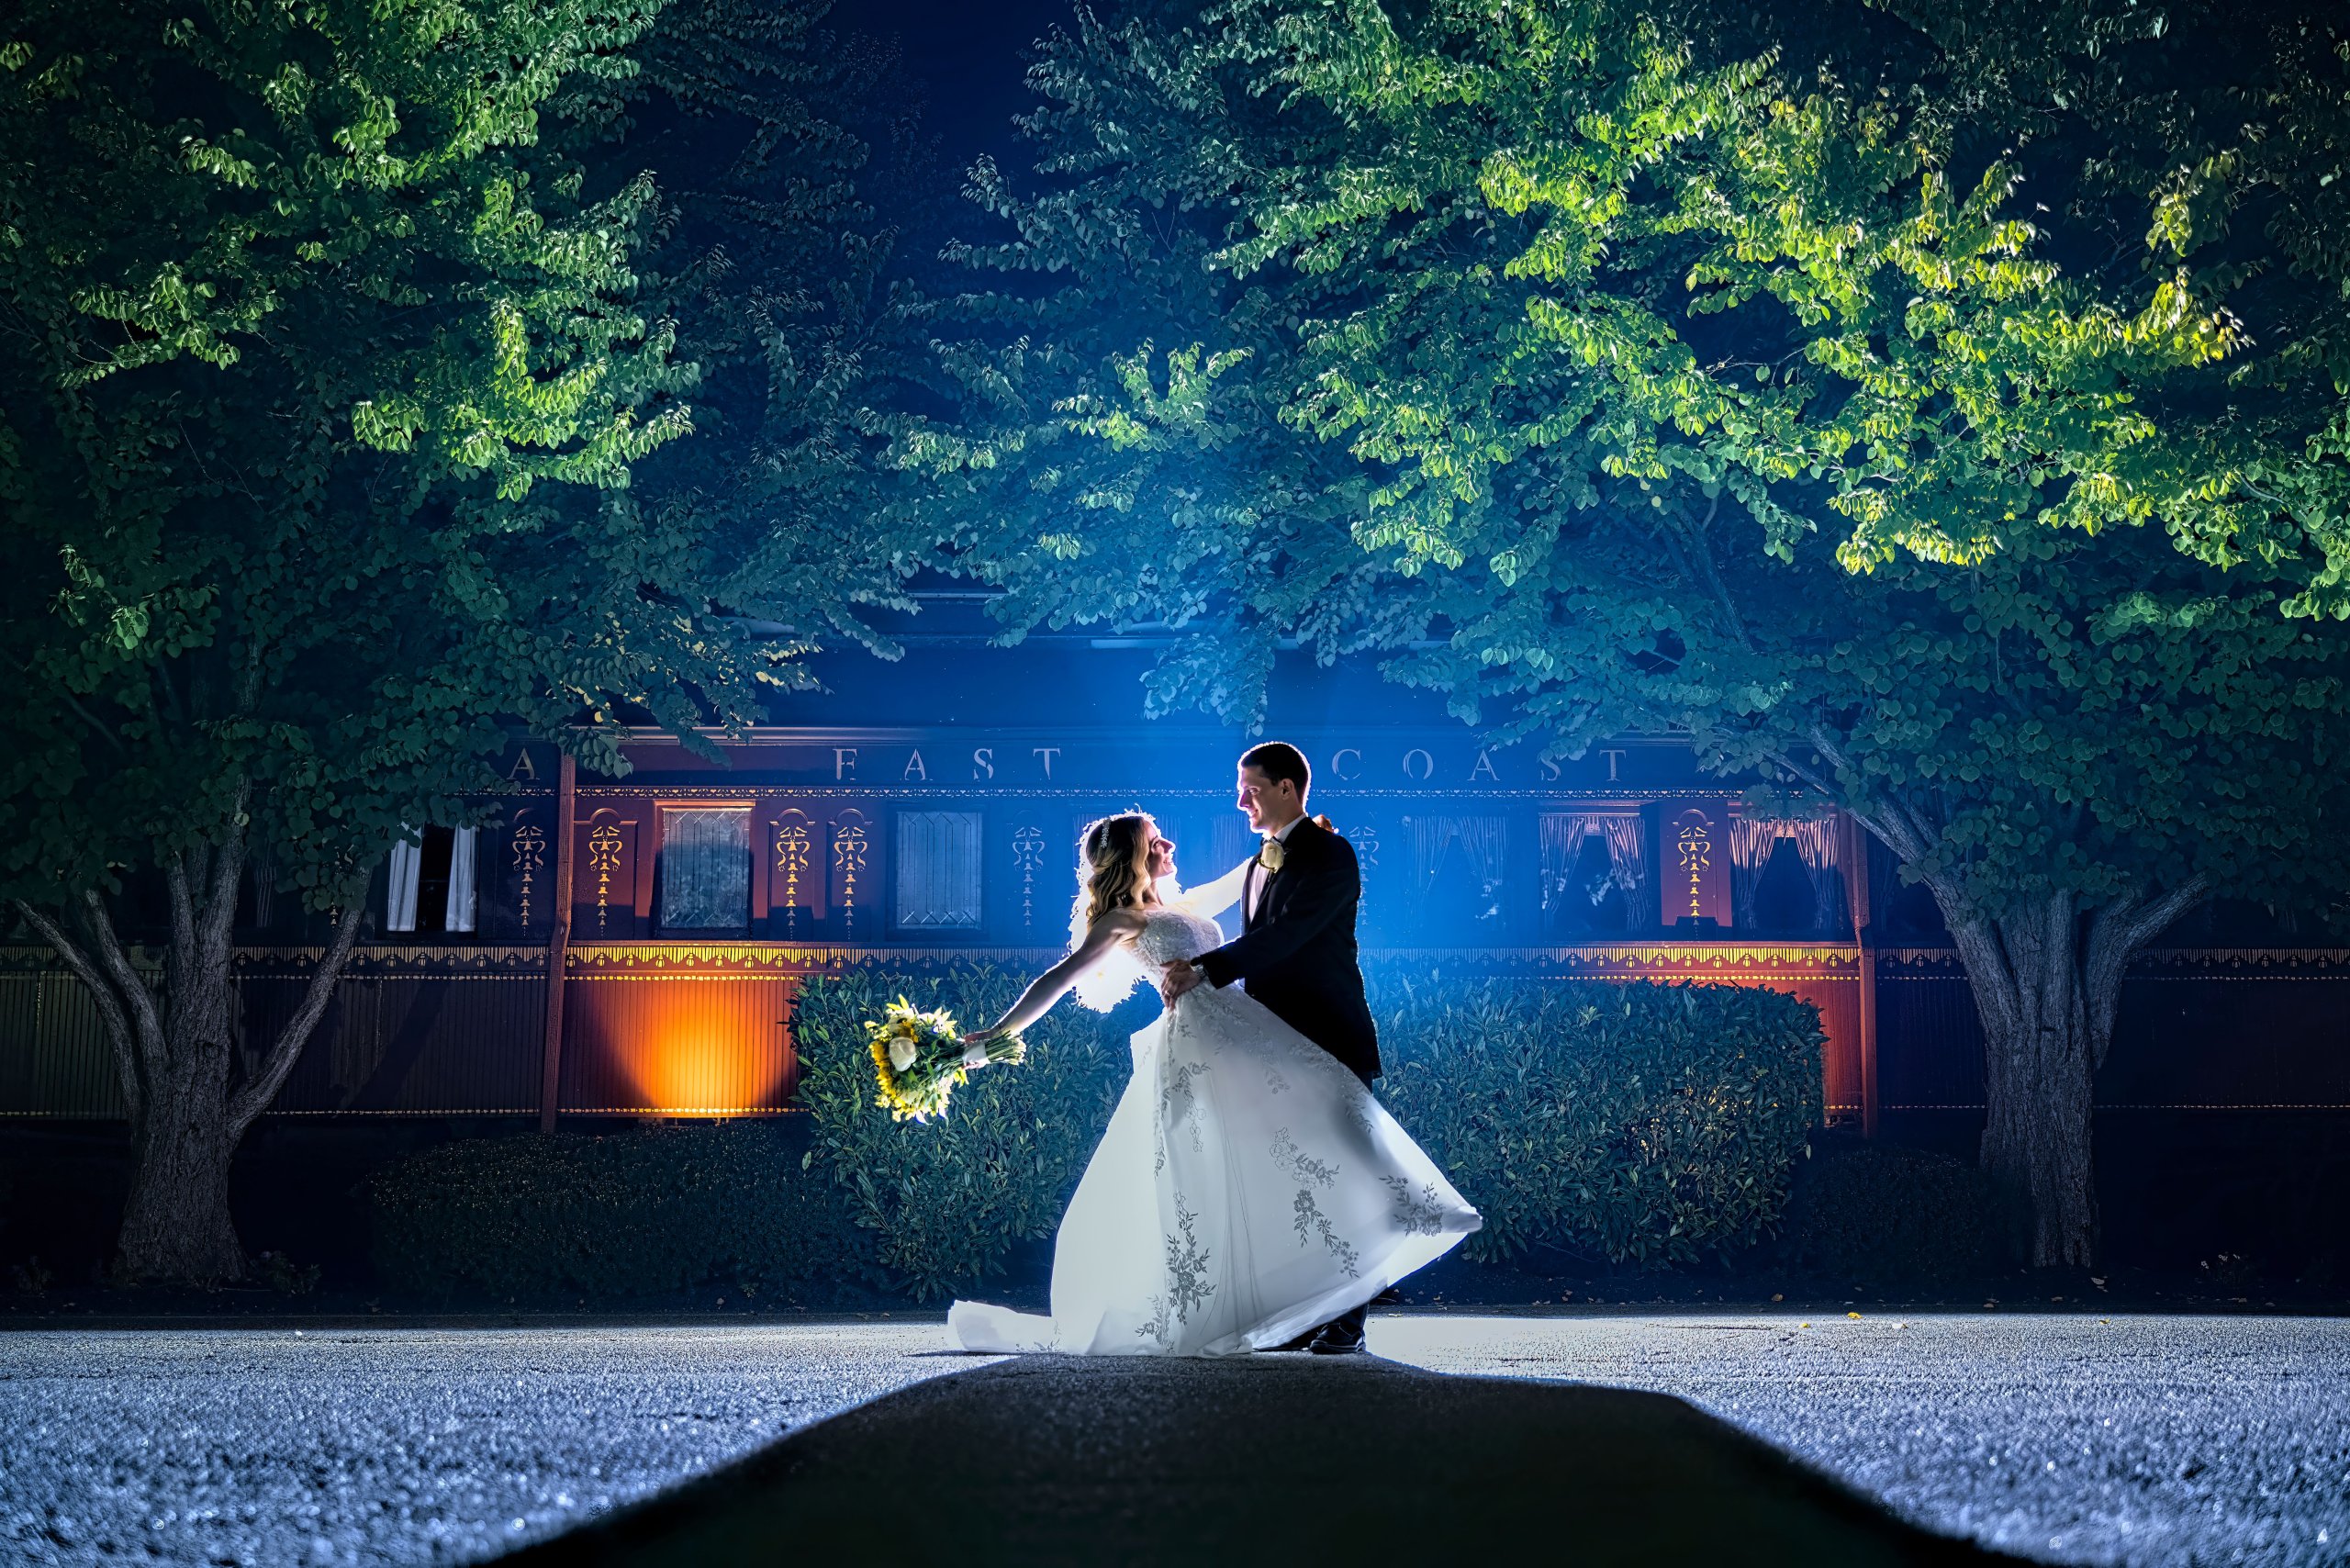 A bride and groom standing in front of trees at night.